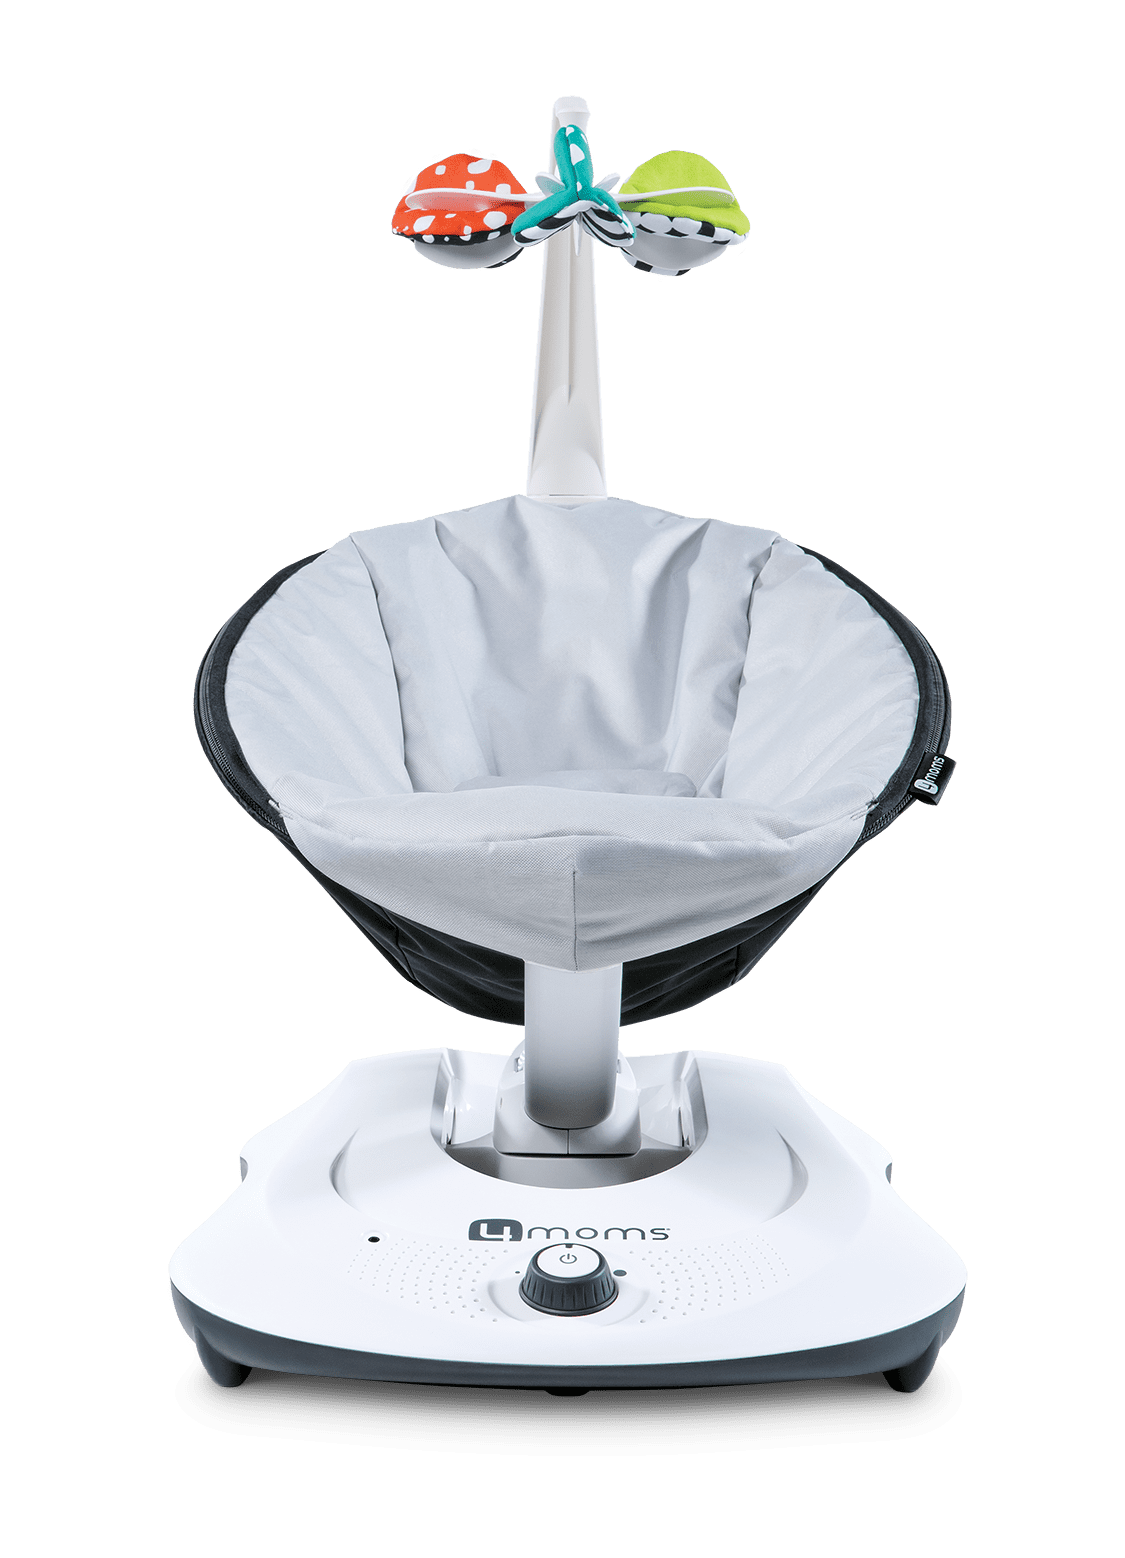 4moms RockaRoo Baby Rocker + Safety Strap Fastener, Compact Baby Rocker with Front to Back Gliding Motion